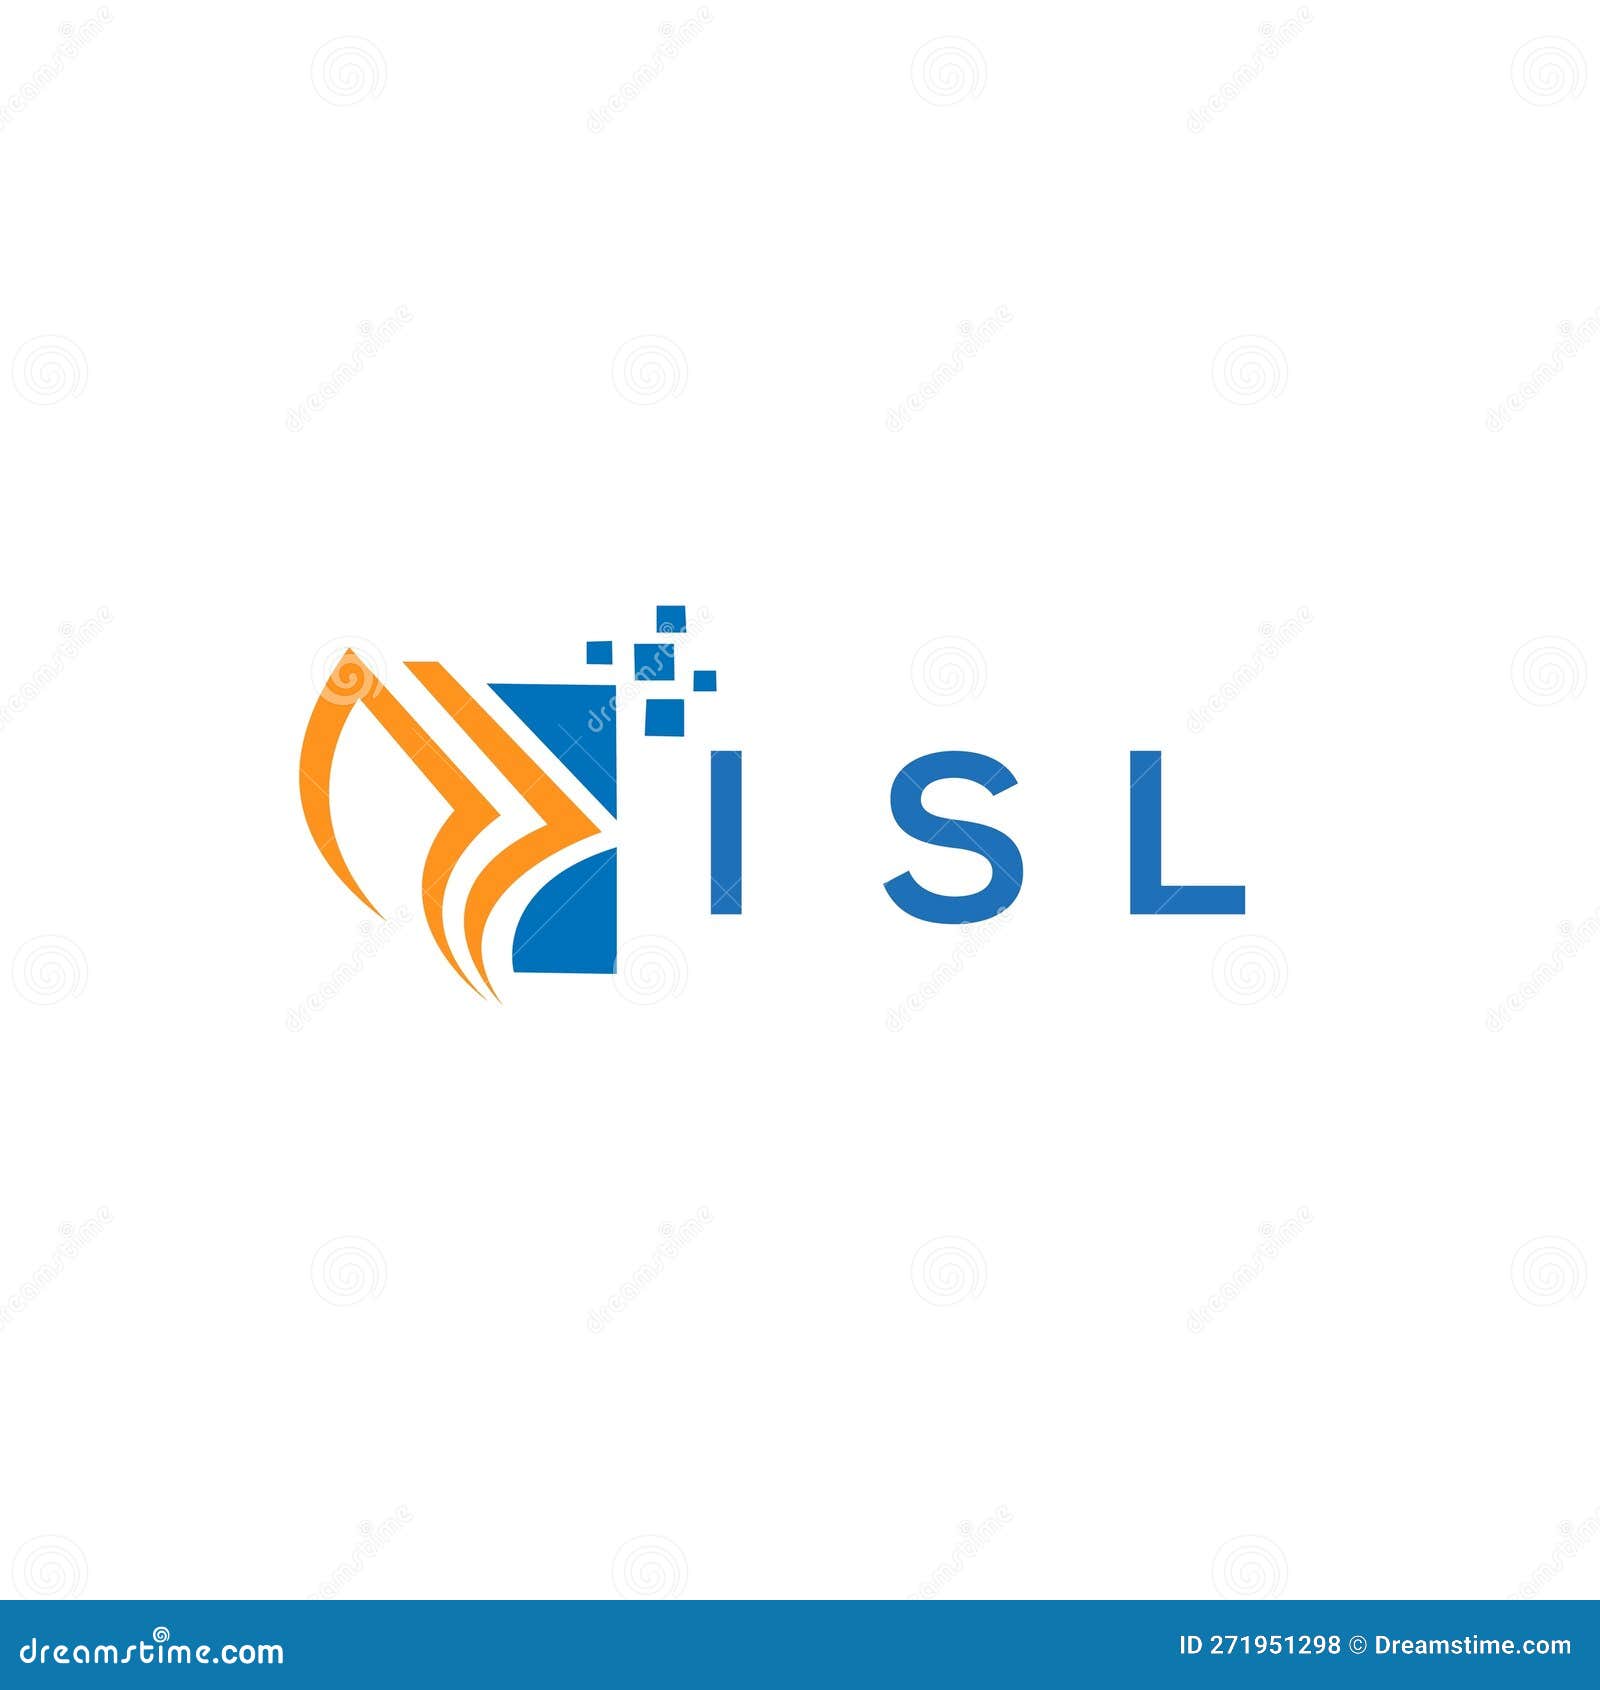 isl credit repair accounting logo  on white background. isl creative initials growth graph letter logo concept. isl business